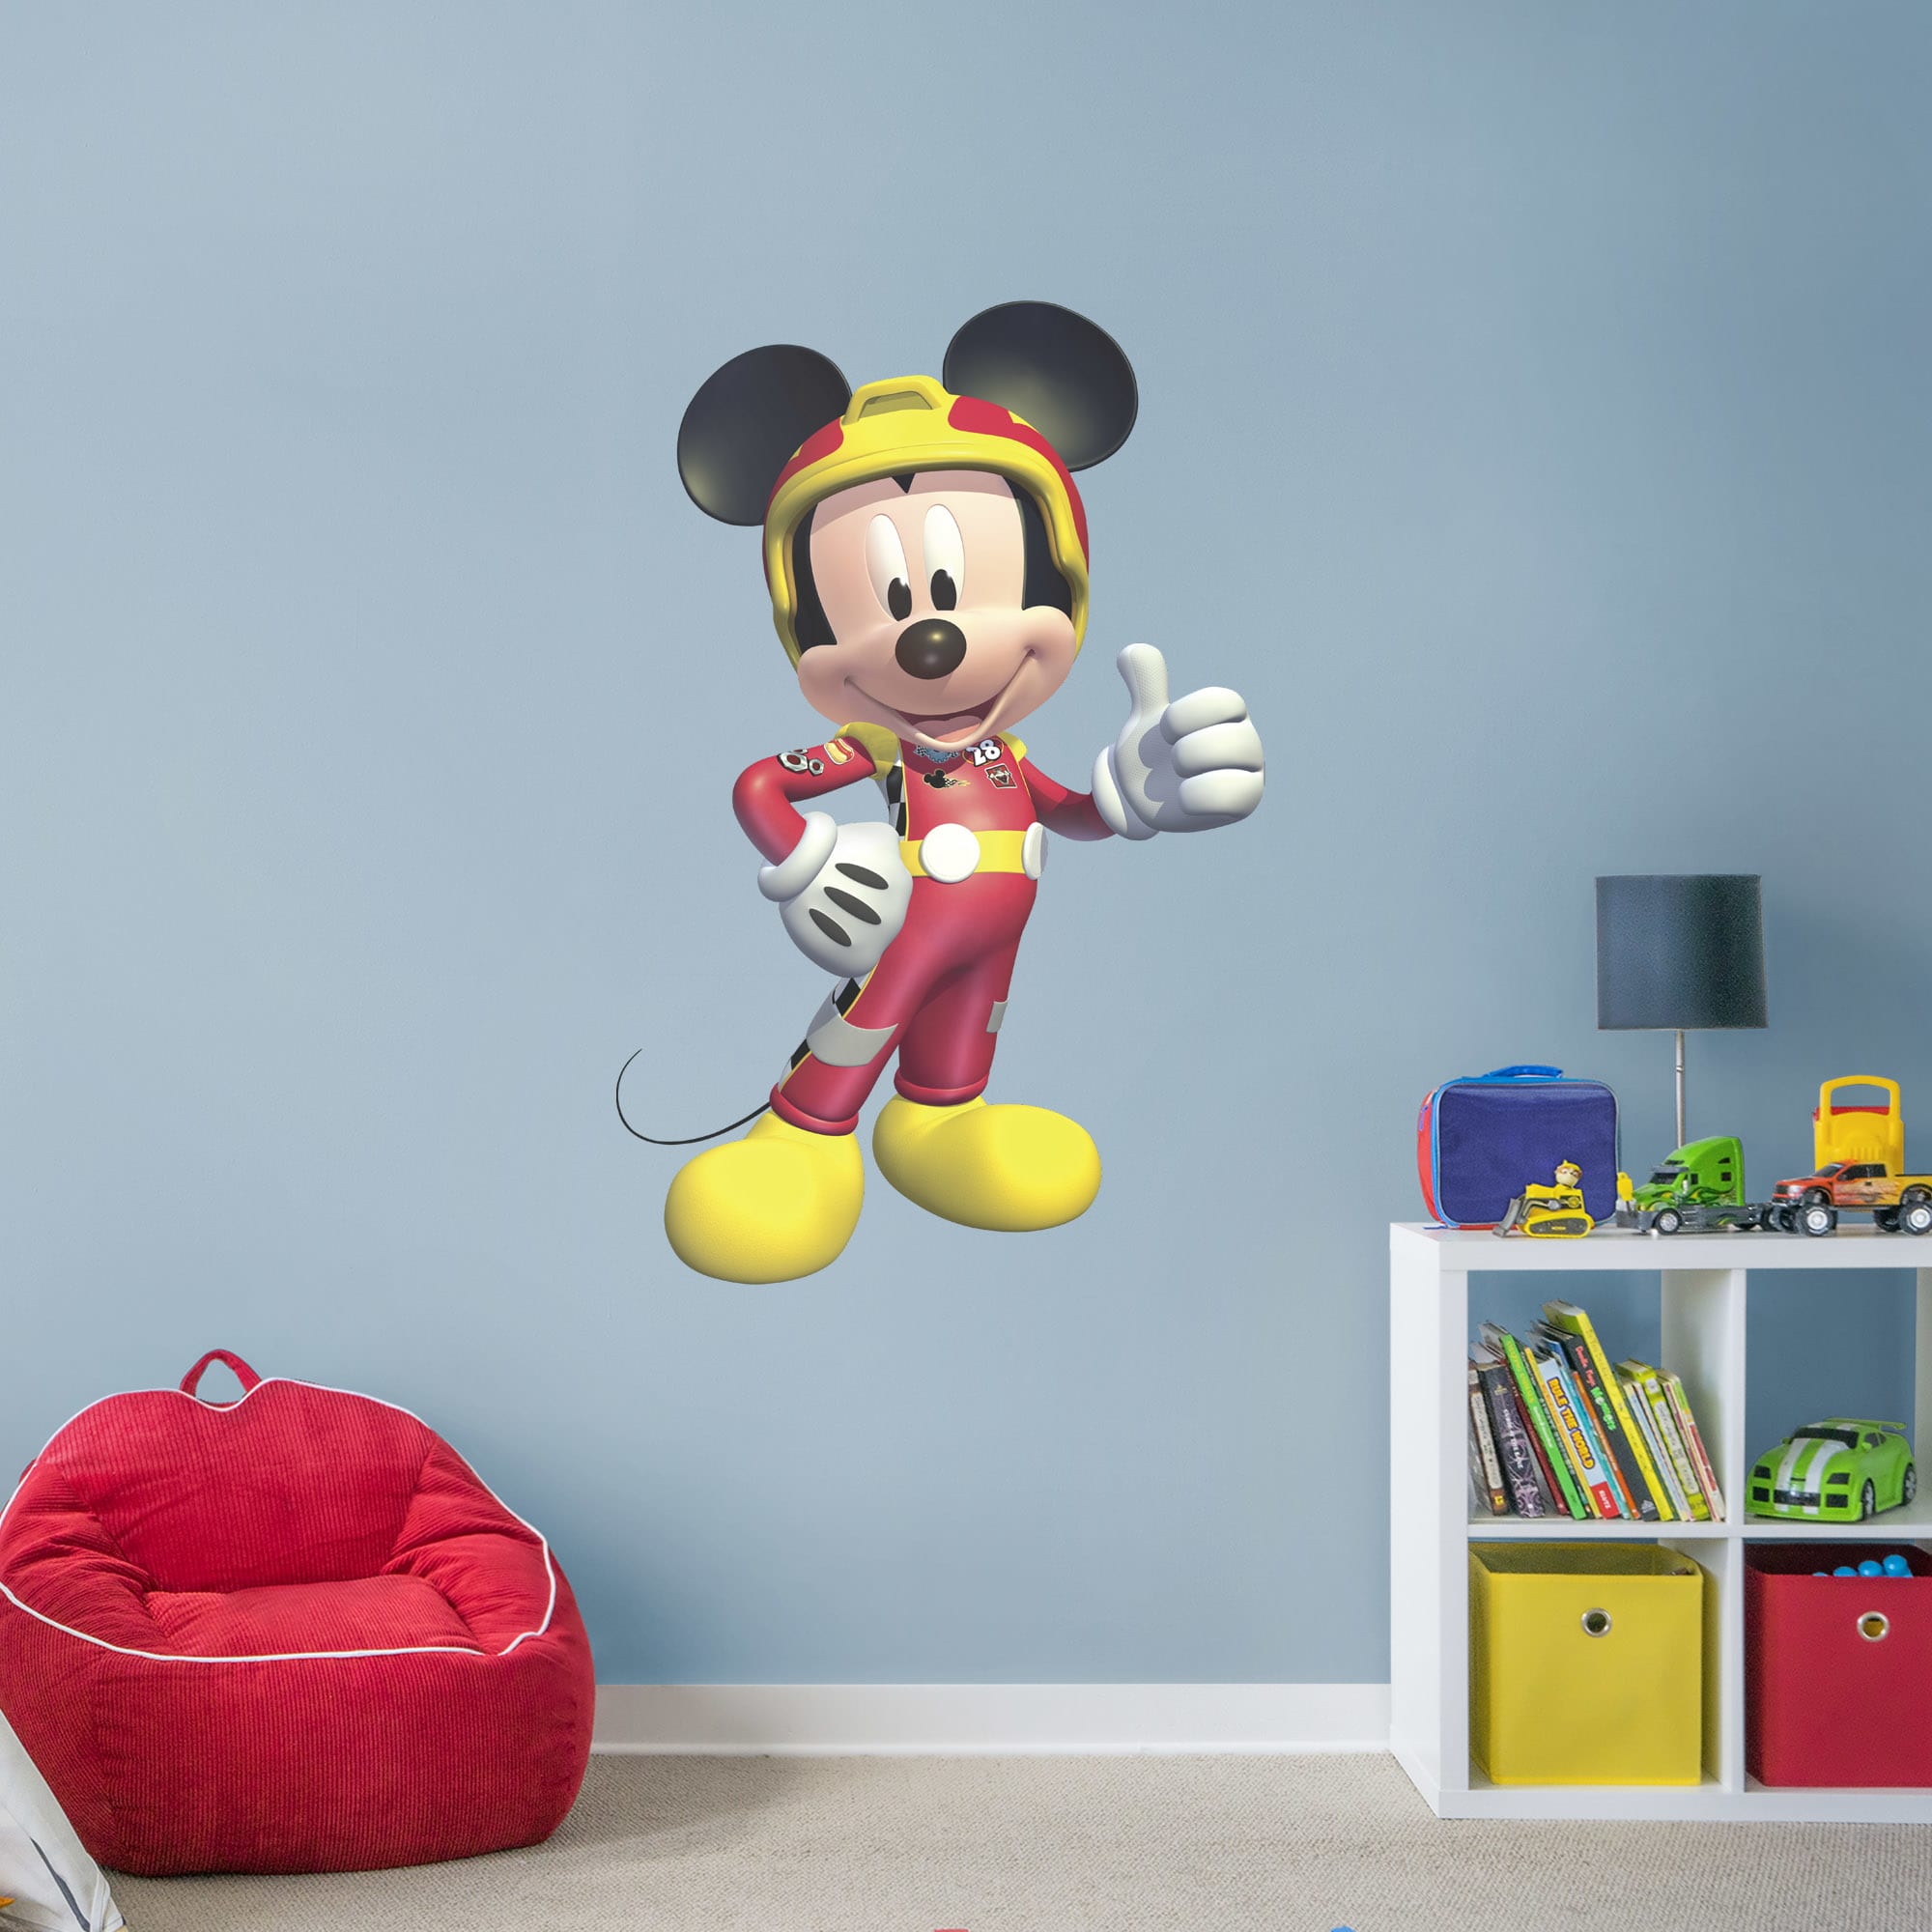 Mickey and the Roadster Racers: Mickey Mouse - Officially Licensed Disney Removable Wall Decal Giant Character + 2 Decals (35"W